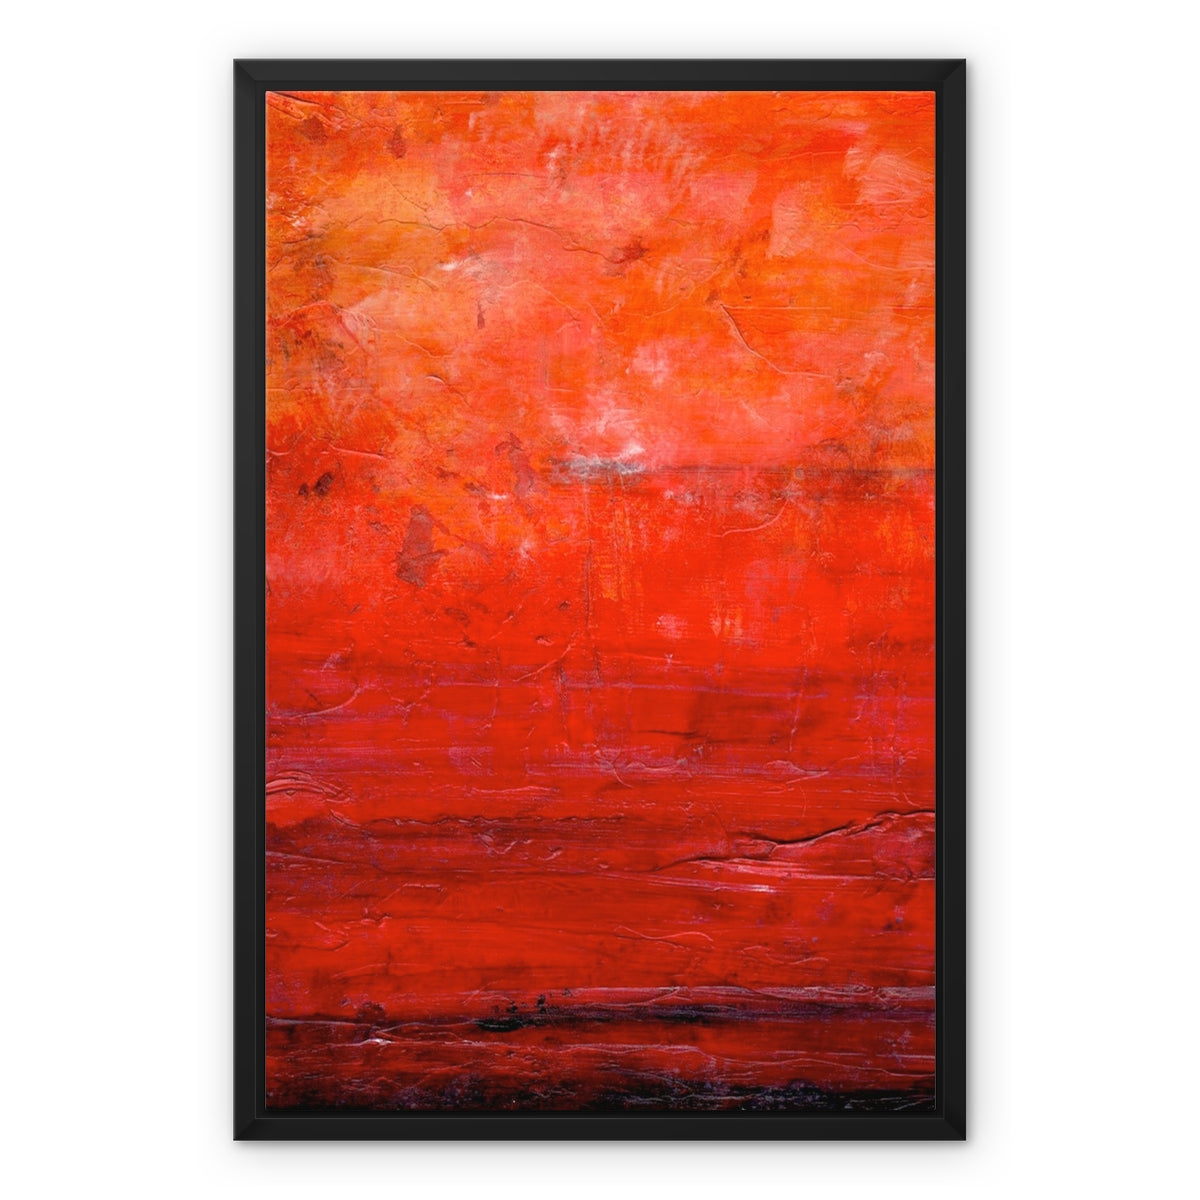 Abstract Summer Painting | Framed Canvas From Scotland-Floating Framed Canvas Prints-Abstract & Impressionistic Art Gallery-18"x24"-Paintings, Prints, Homeware, Art Gifts From Scotland By Scottish Artist Kevin Hunter